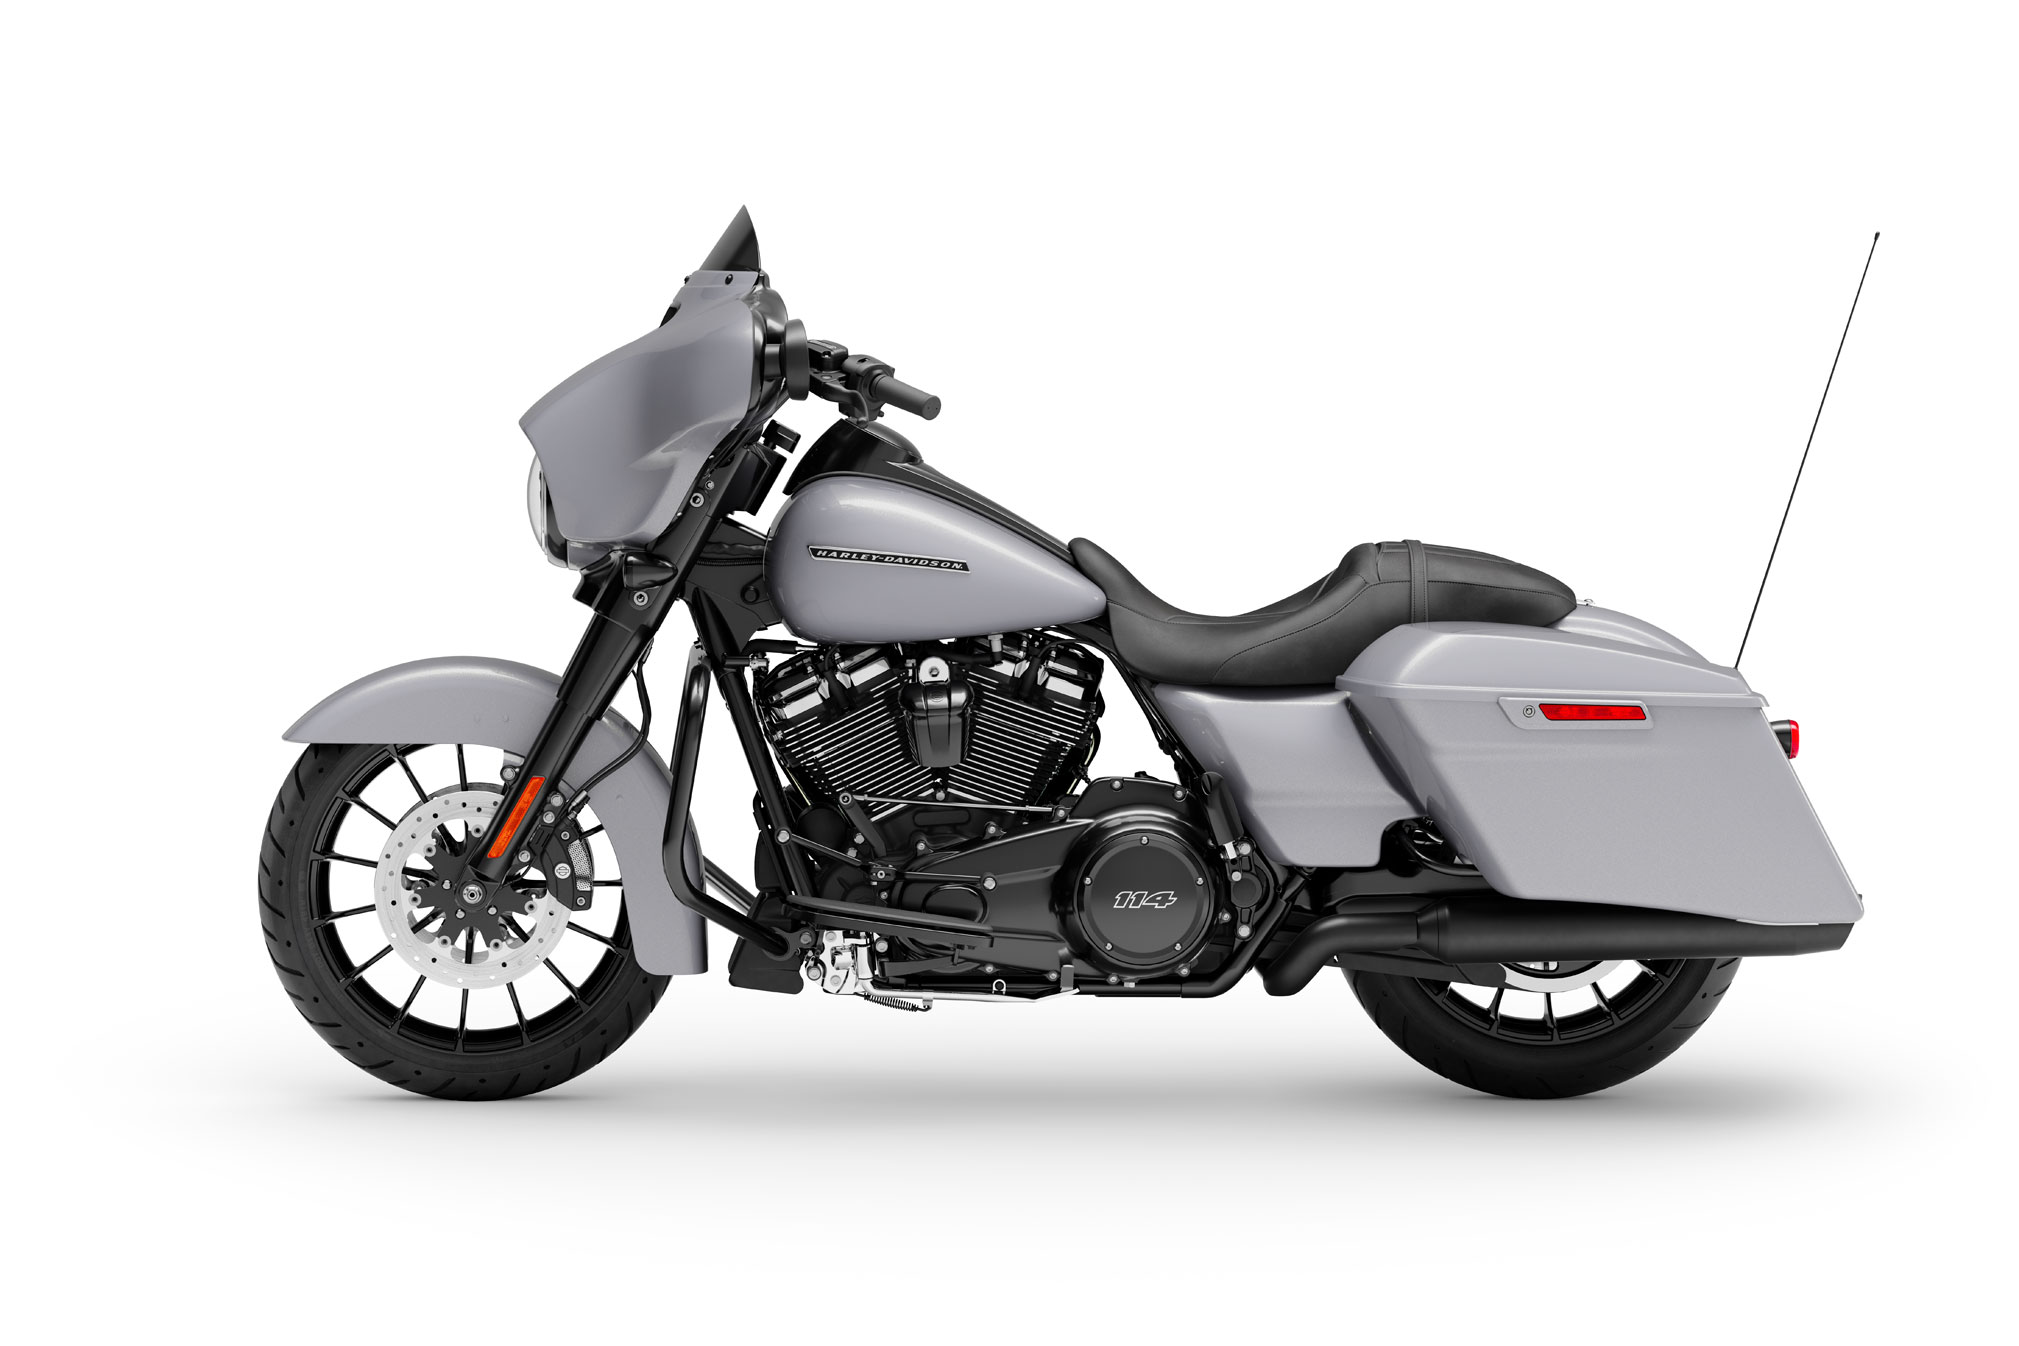 2019 Harley Davidson Street Glide Special Guide Total Motorcycle